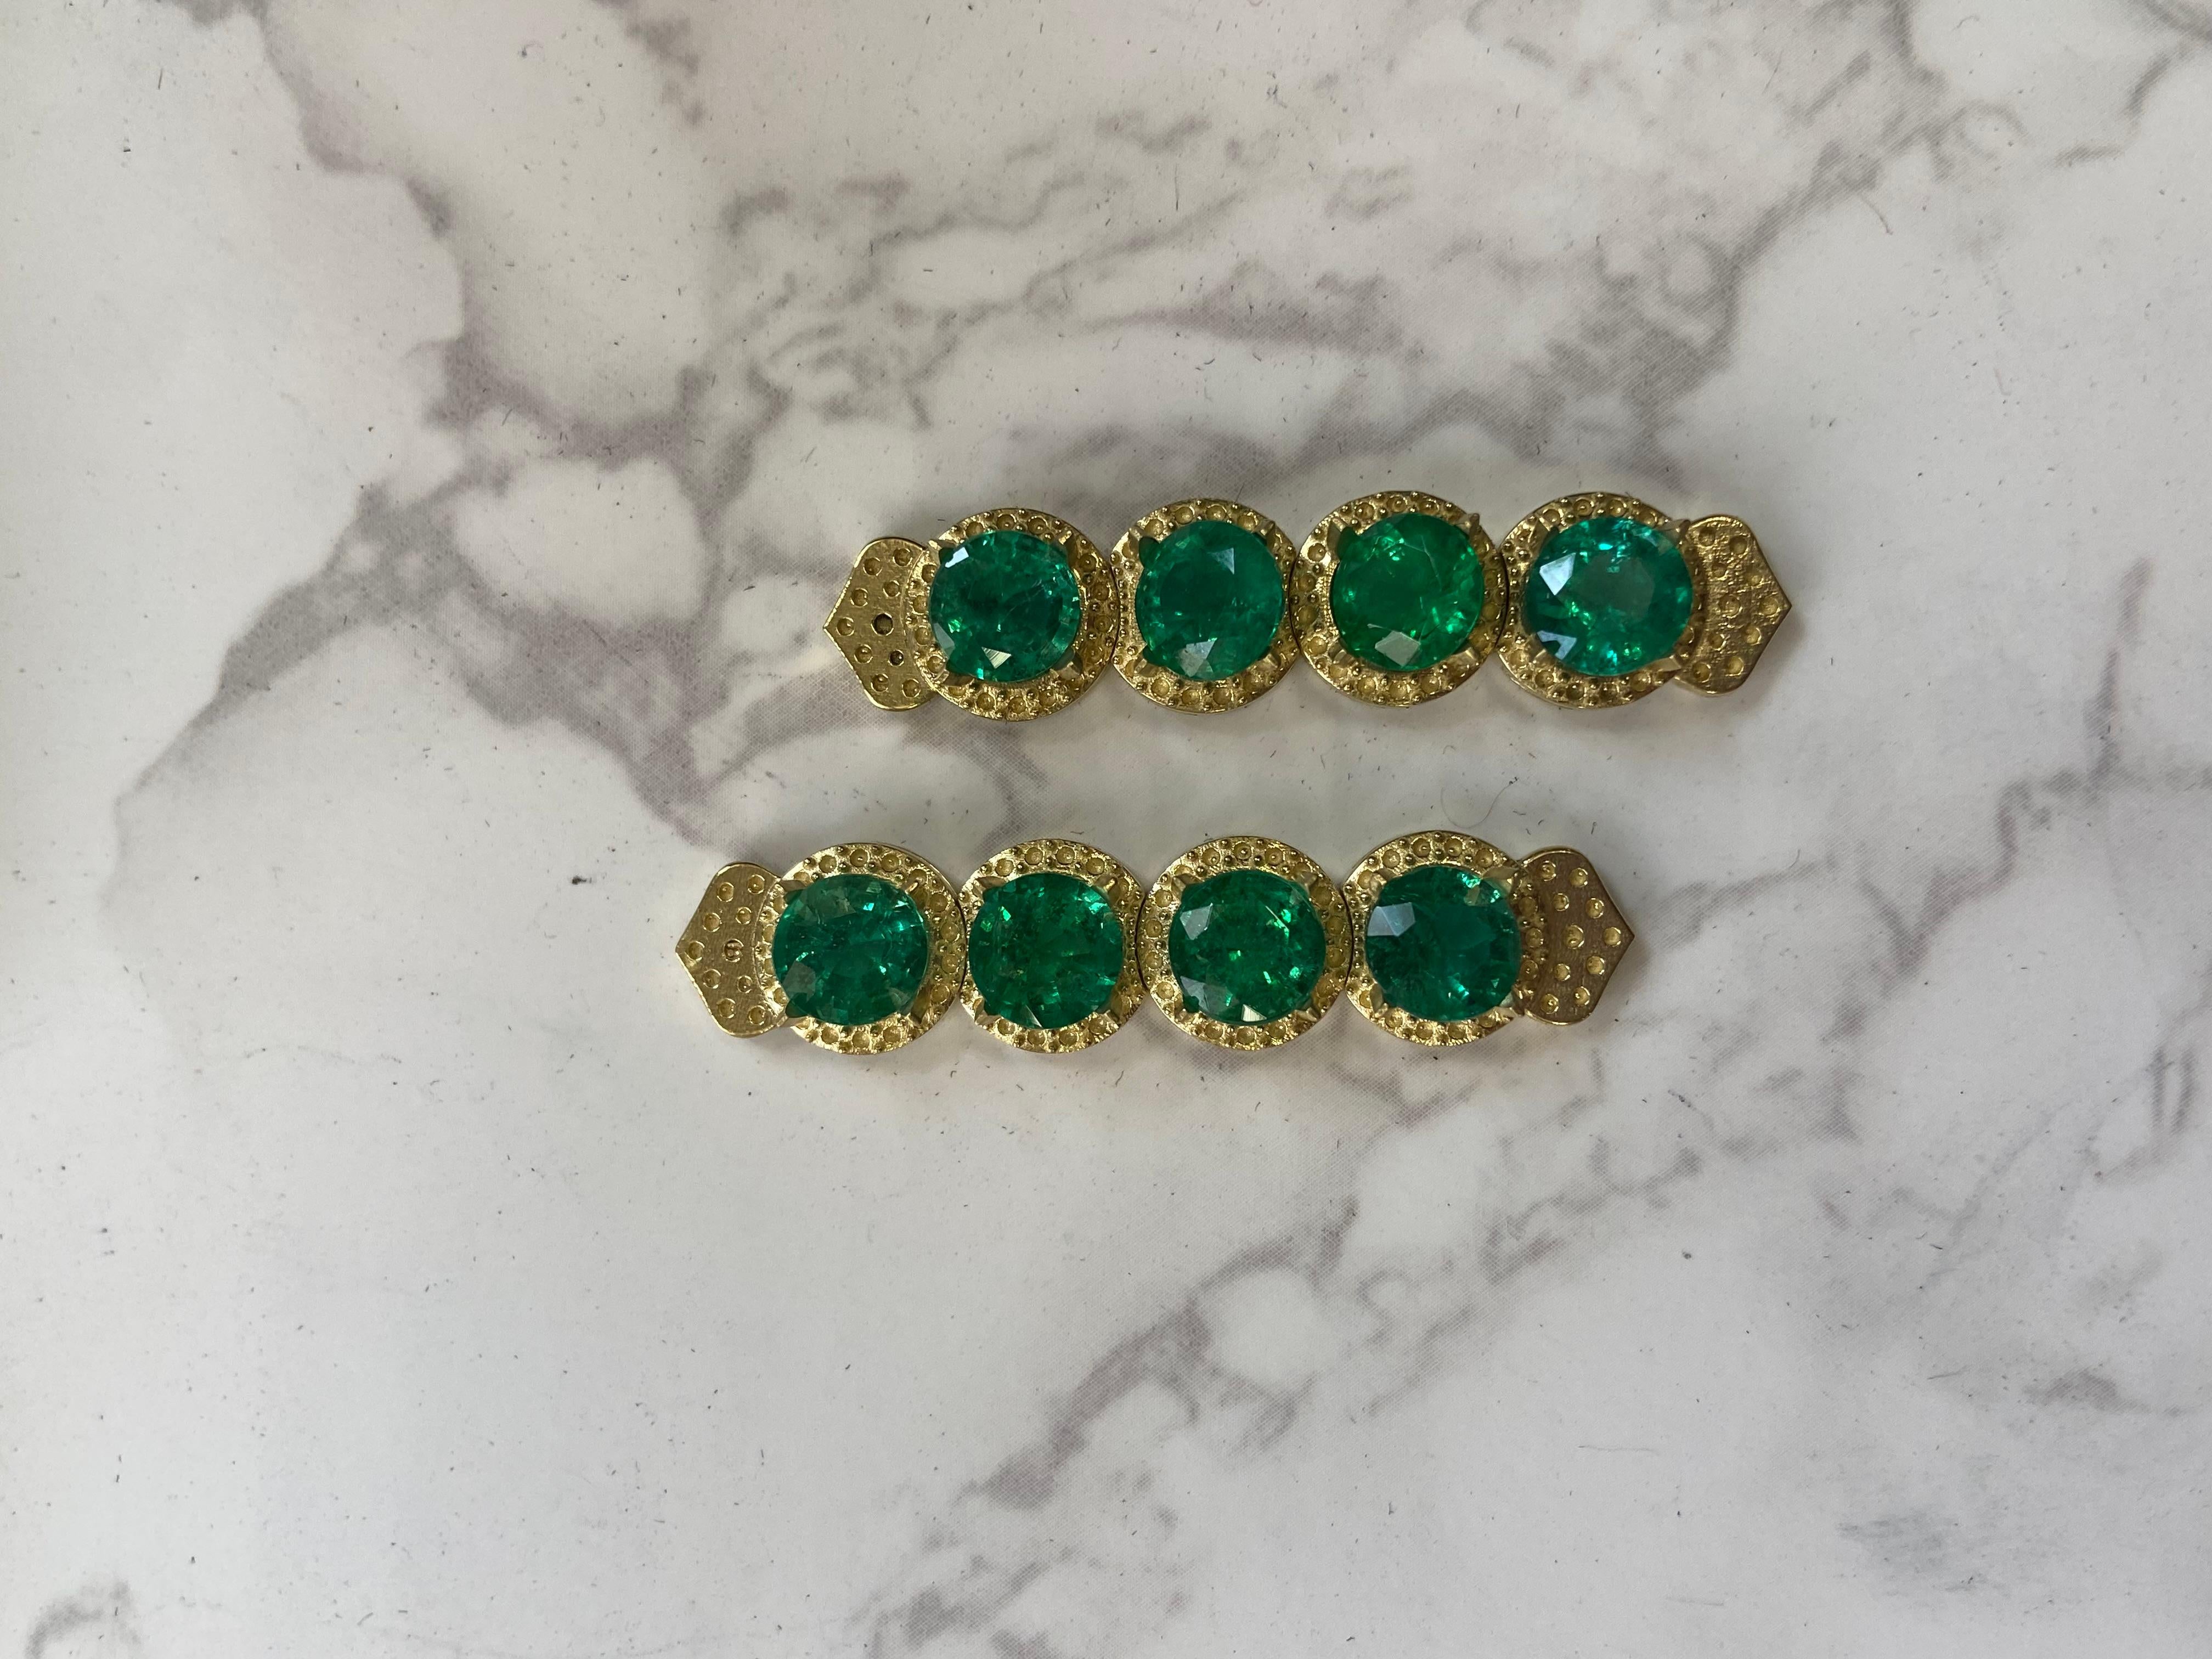 Contemporary 10.88ct Zambian Emerald earrings in 18K yellow gold. For Sale